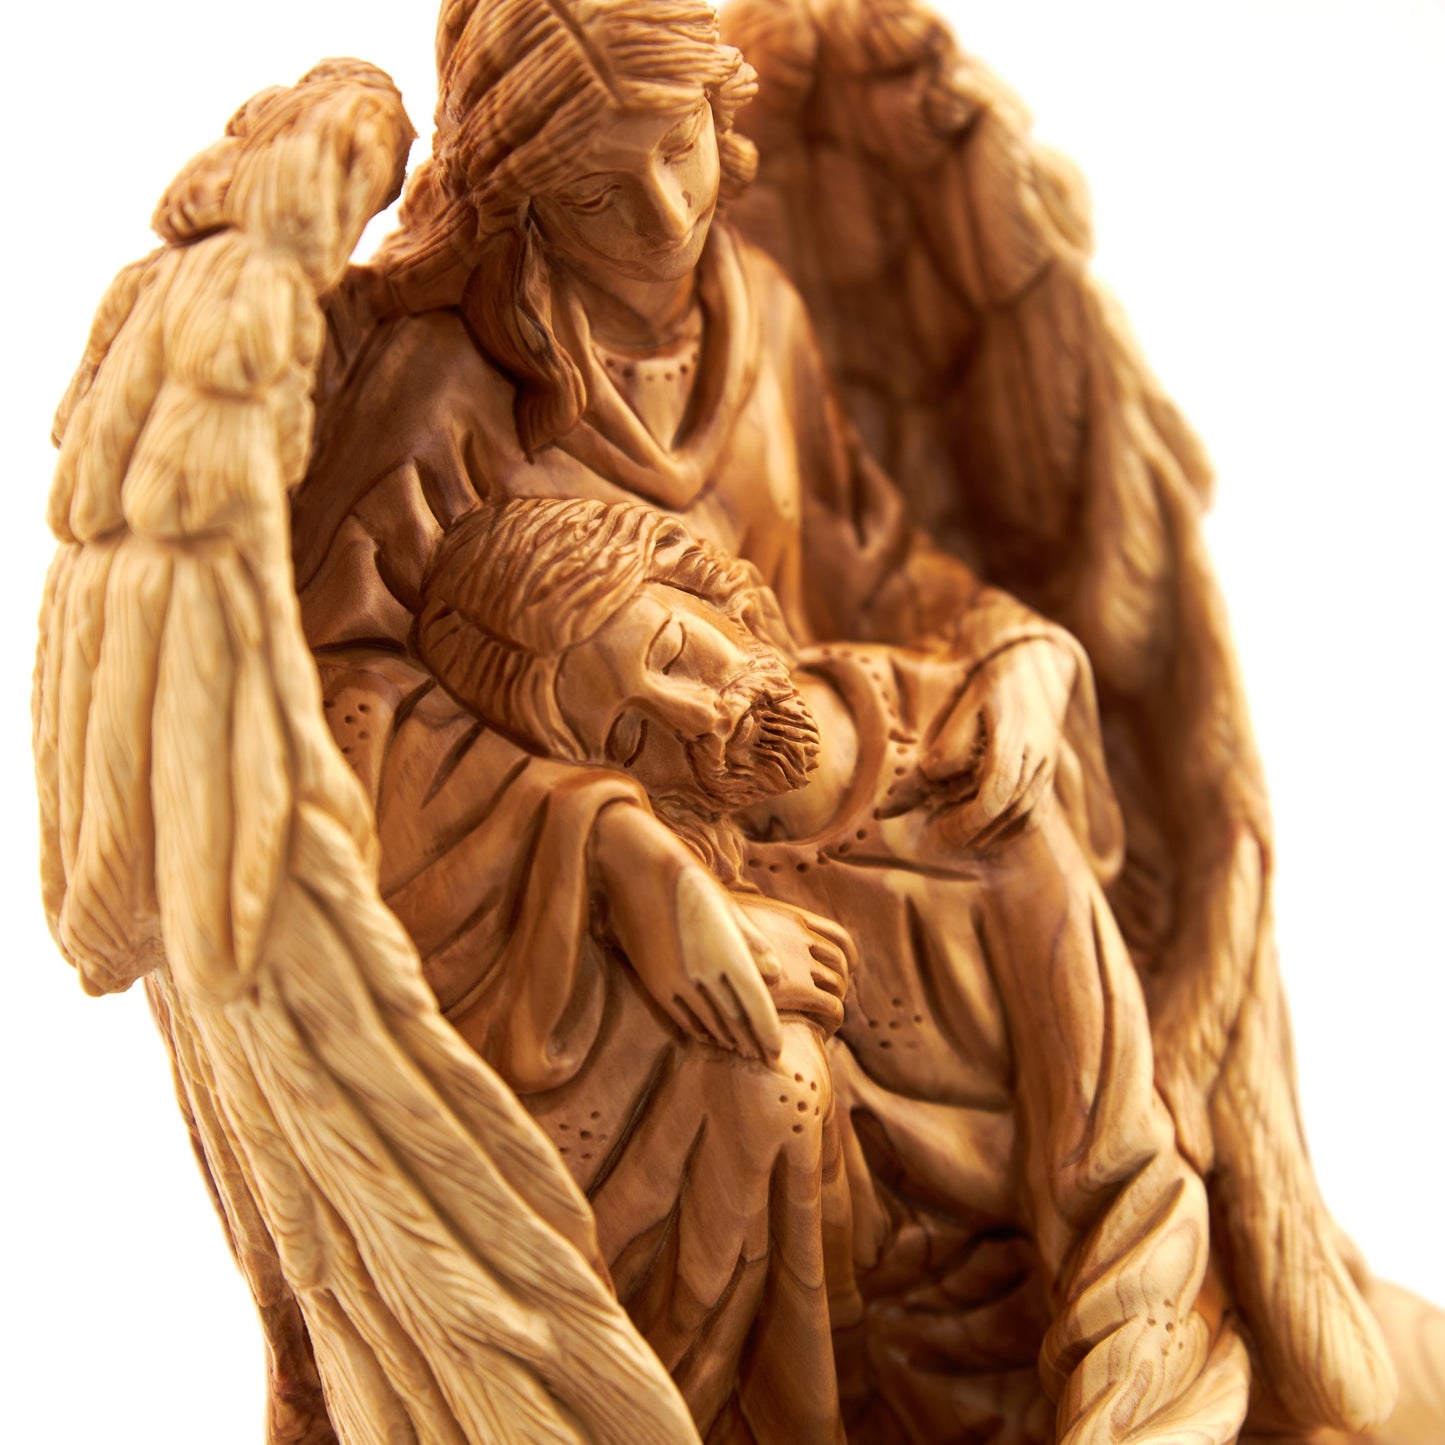 Wooden Statue of Jesus with an Angel 9.1"